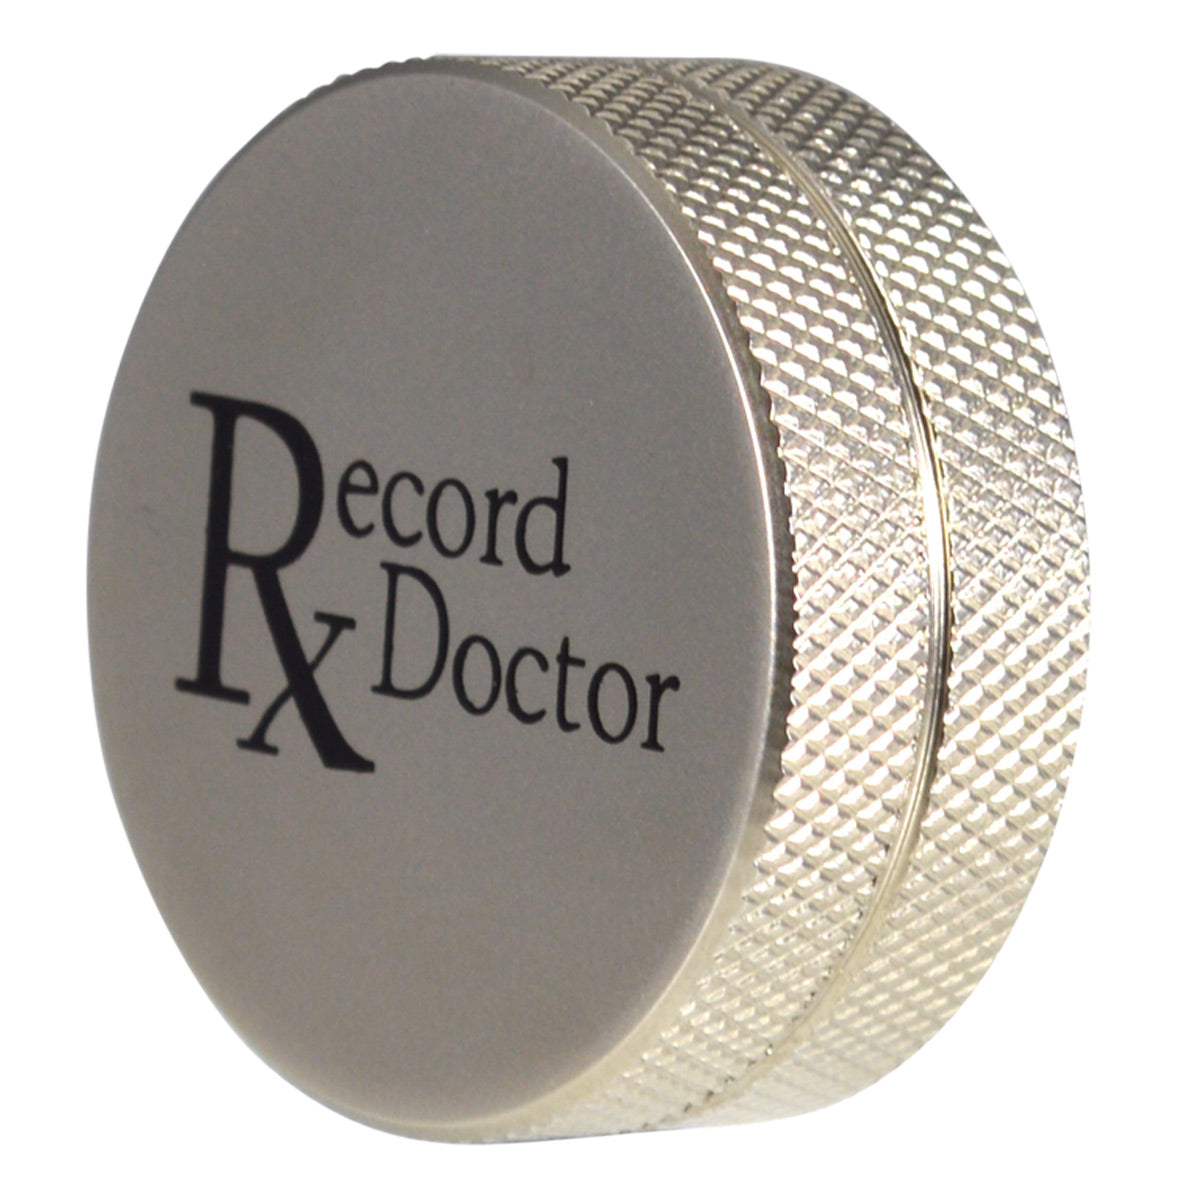 Record Doctor VI Record Cleaning Machine with RxLP Cleaning Solution - 20th Anniversary Edition (Gloss Black), Low Profile Record Clamp, and 12" Cork Turntable Slipmat